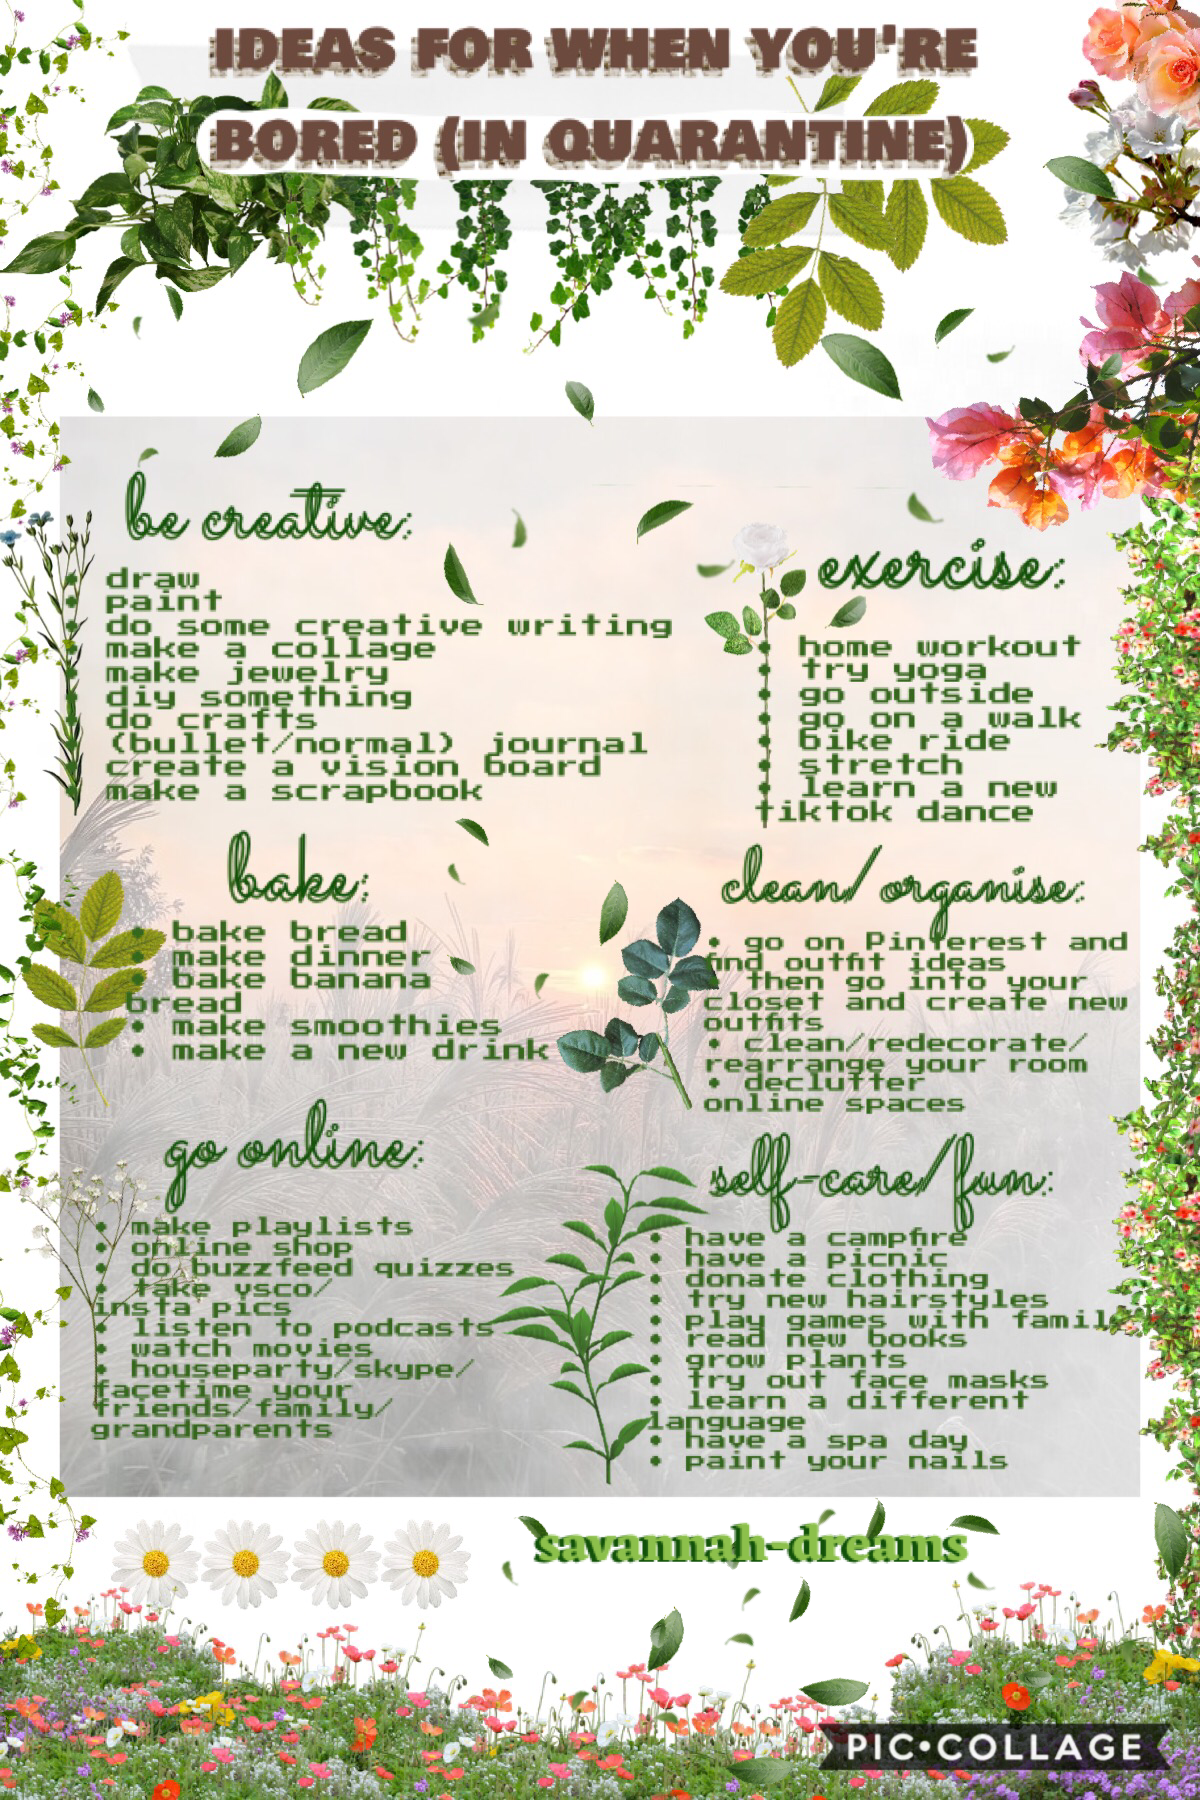 hmm was meaning to make one of these ages ago but guess what. online skl gives u SO much freaking work wth 😰🥺🌿 ahh comment below hmm maybe some recipe/baking ideas 👌🏼🥑